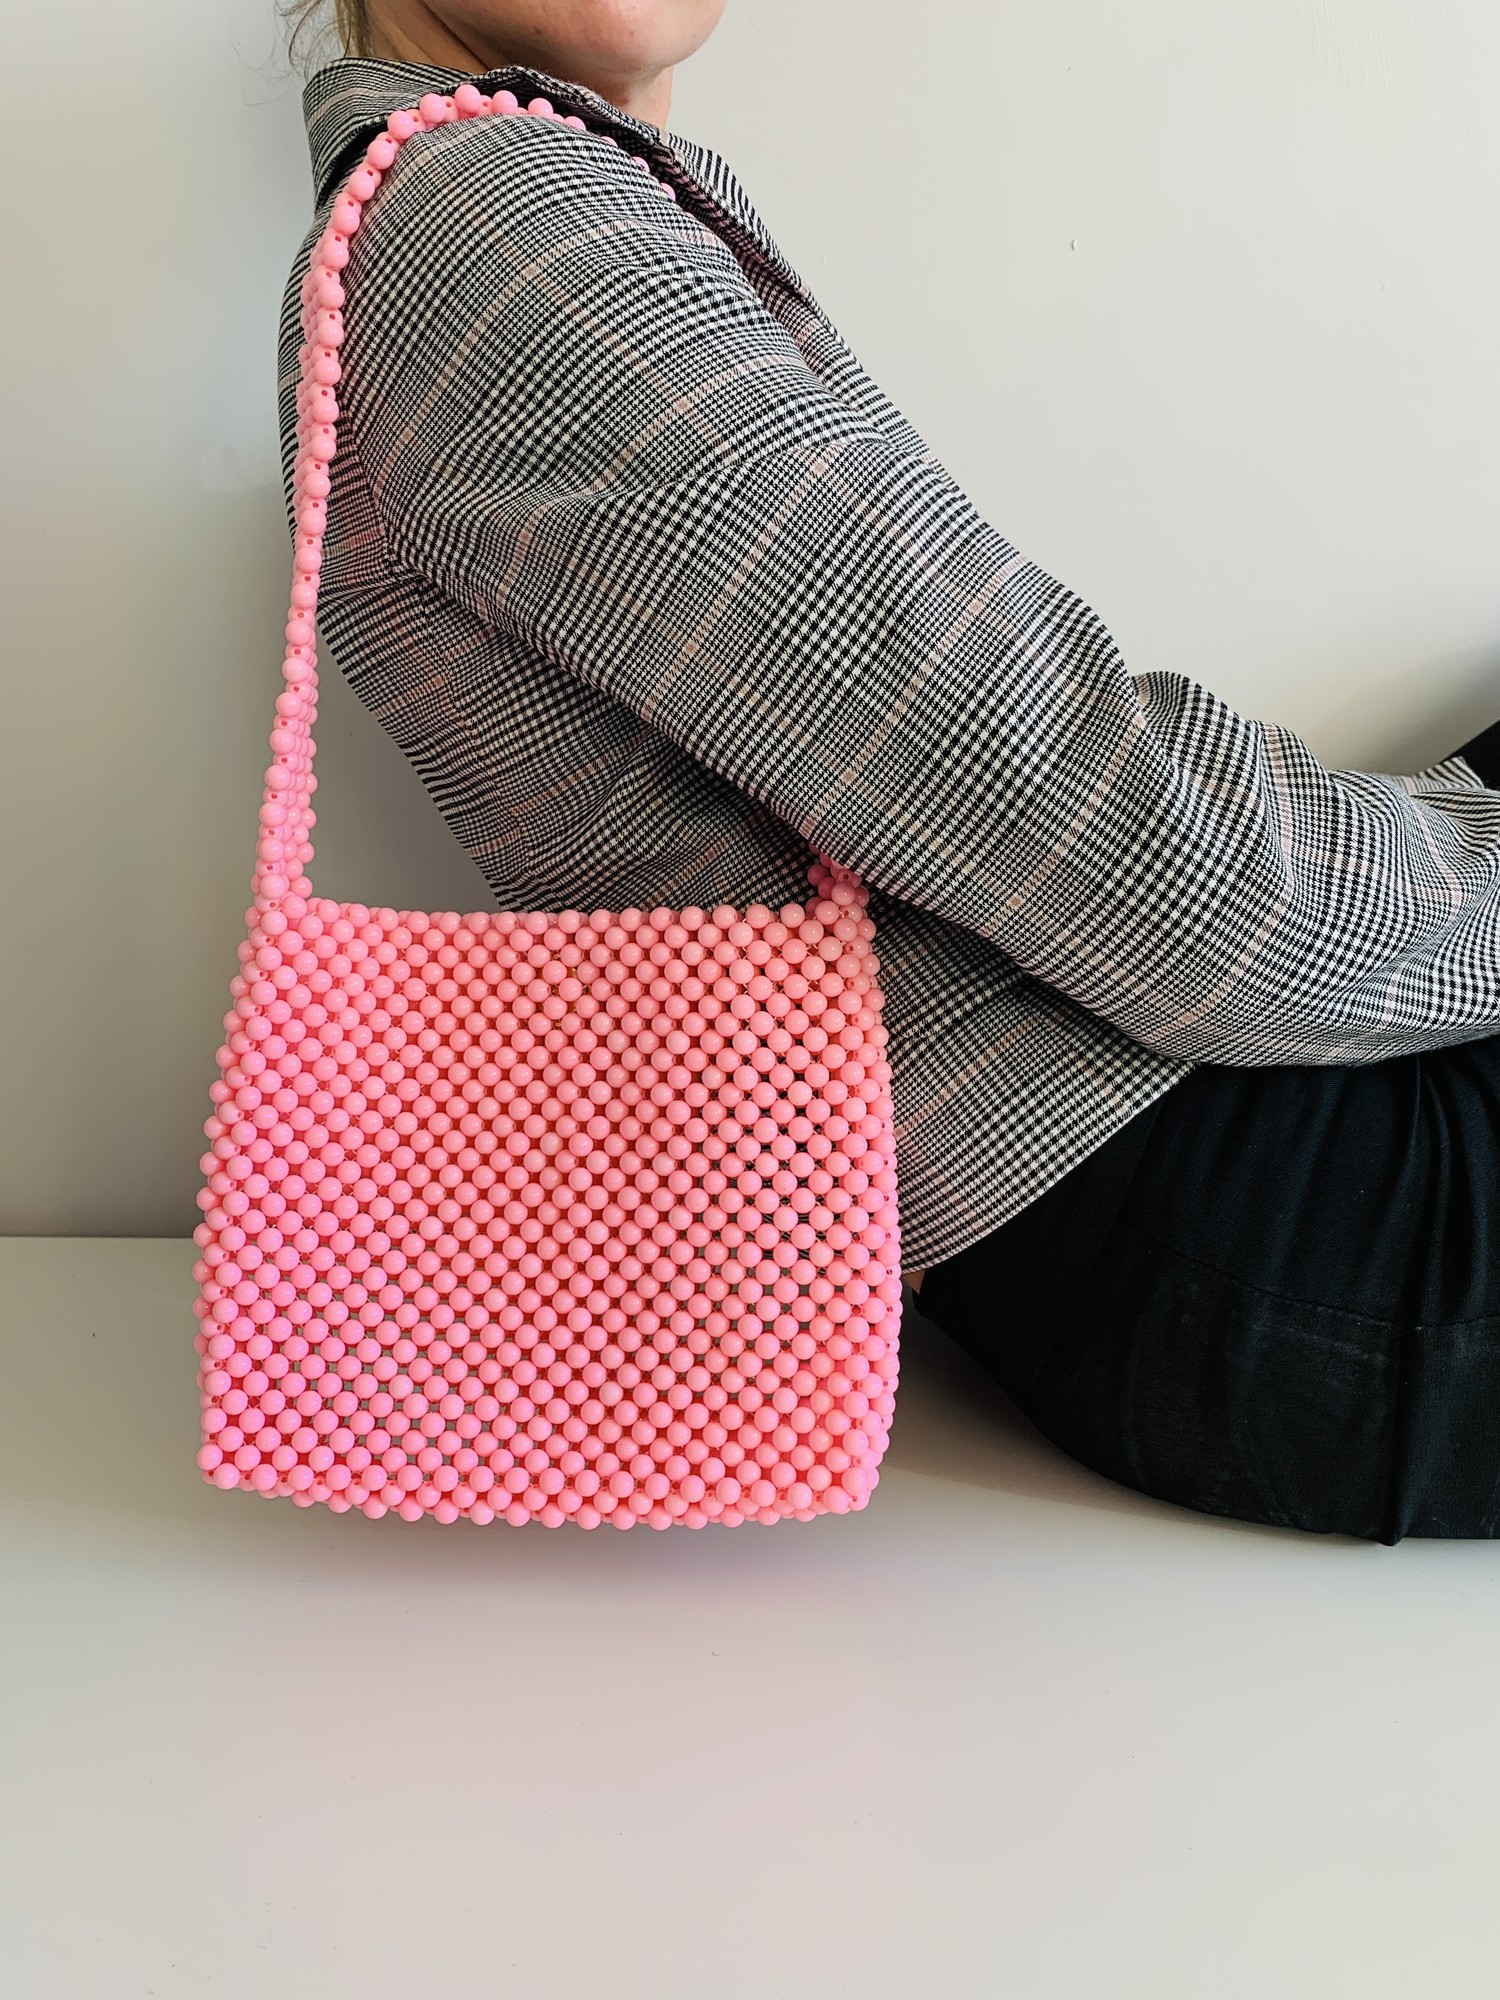 Basic pink bag made of acrylic frosted beads